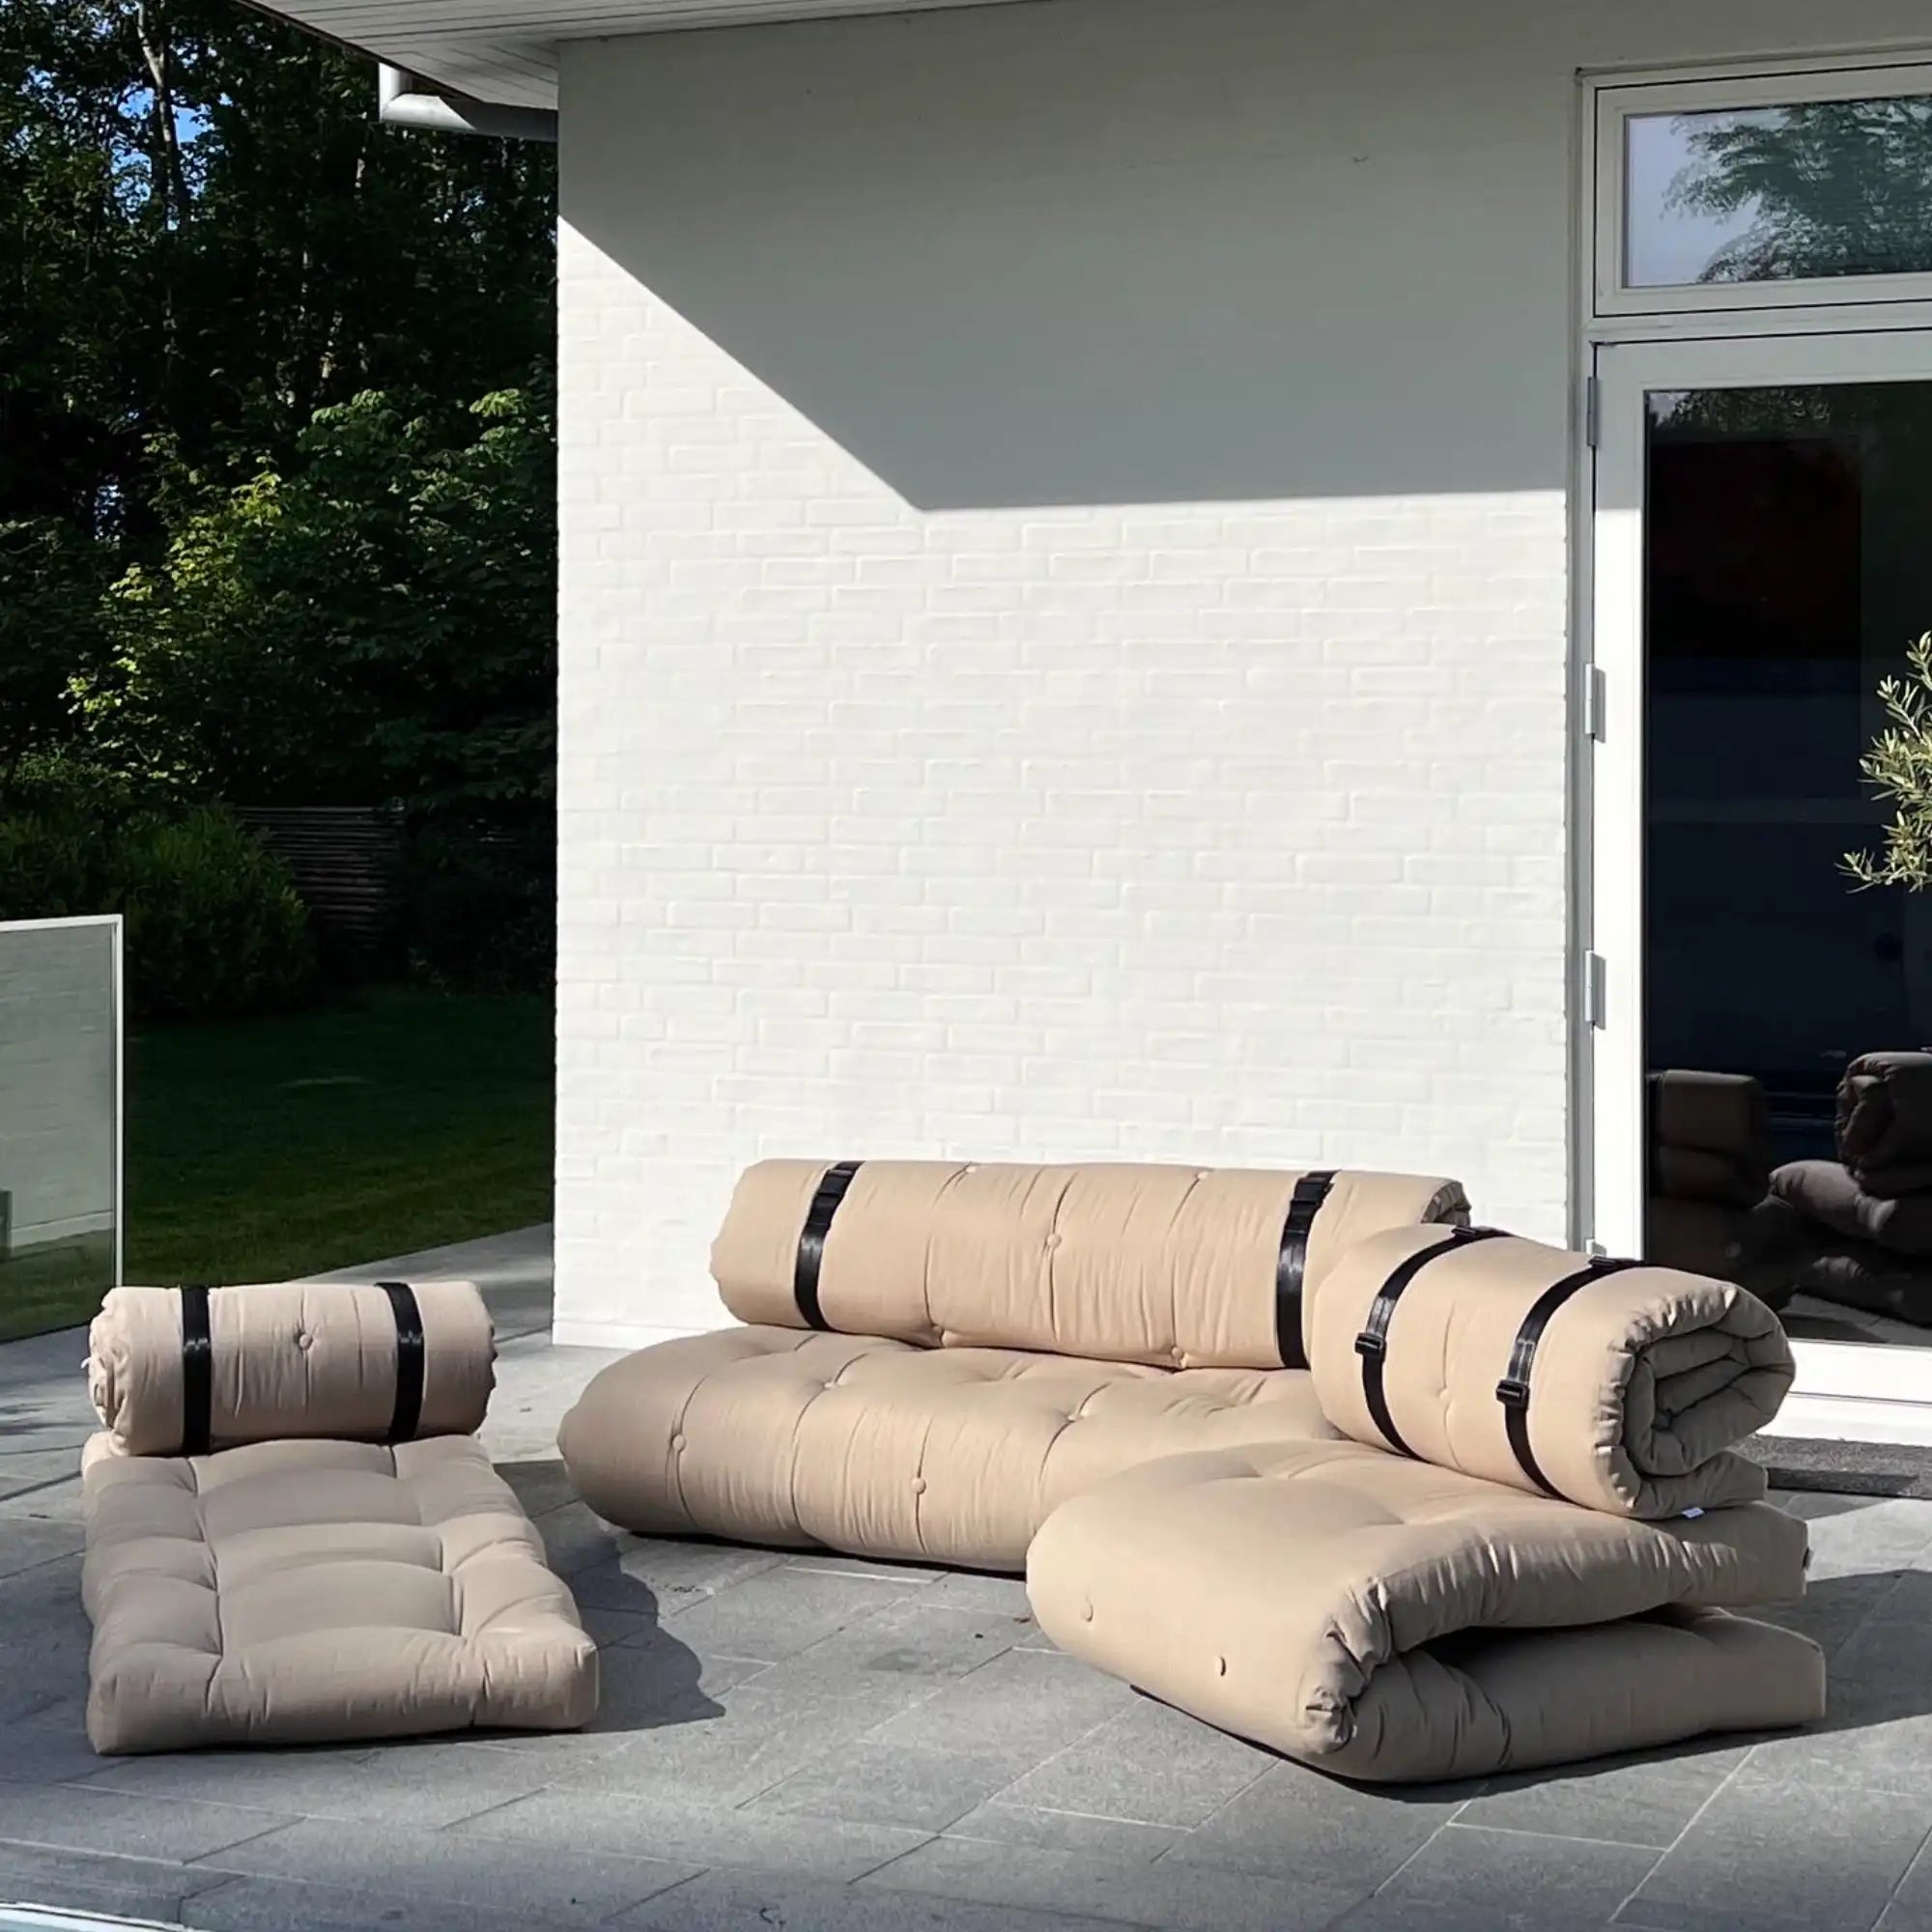 Outdoor Buckle-Up Sofa - THAT COOL LIVING